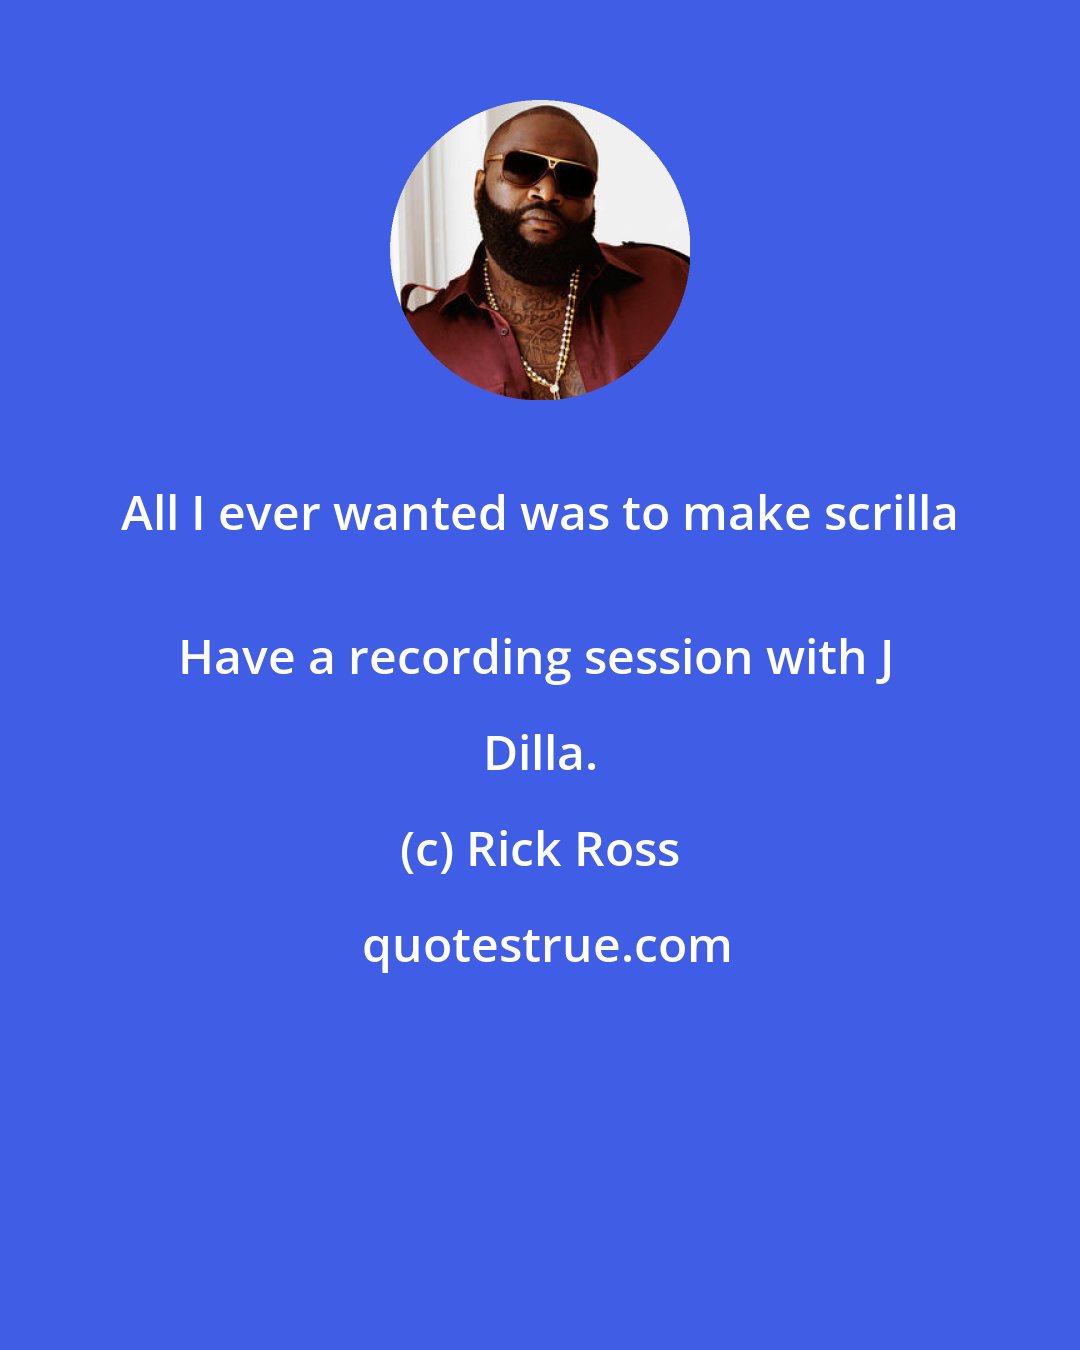 Rick Ross: All I ever wanted was to make scrilla 
Have a recording session with J Dilla.